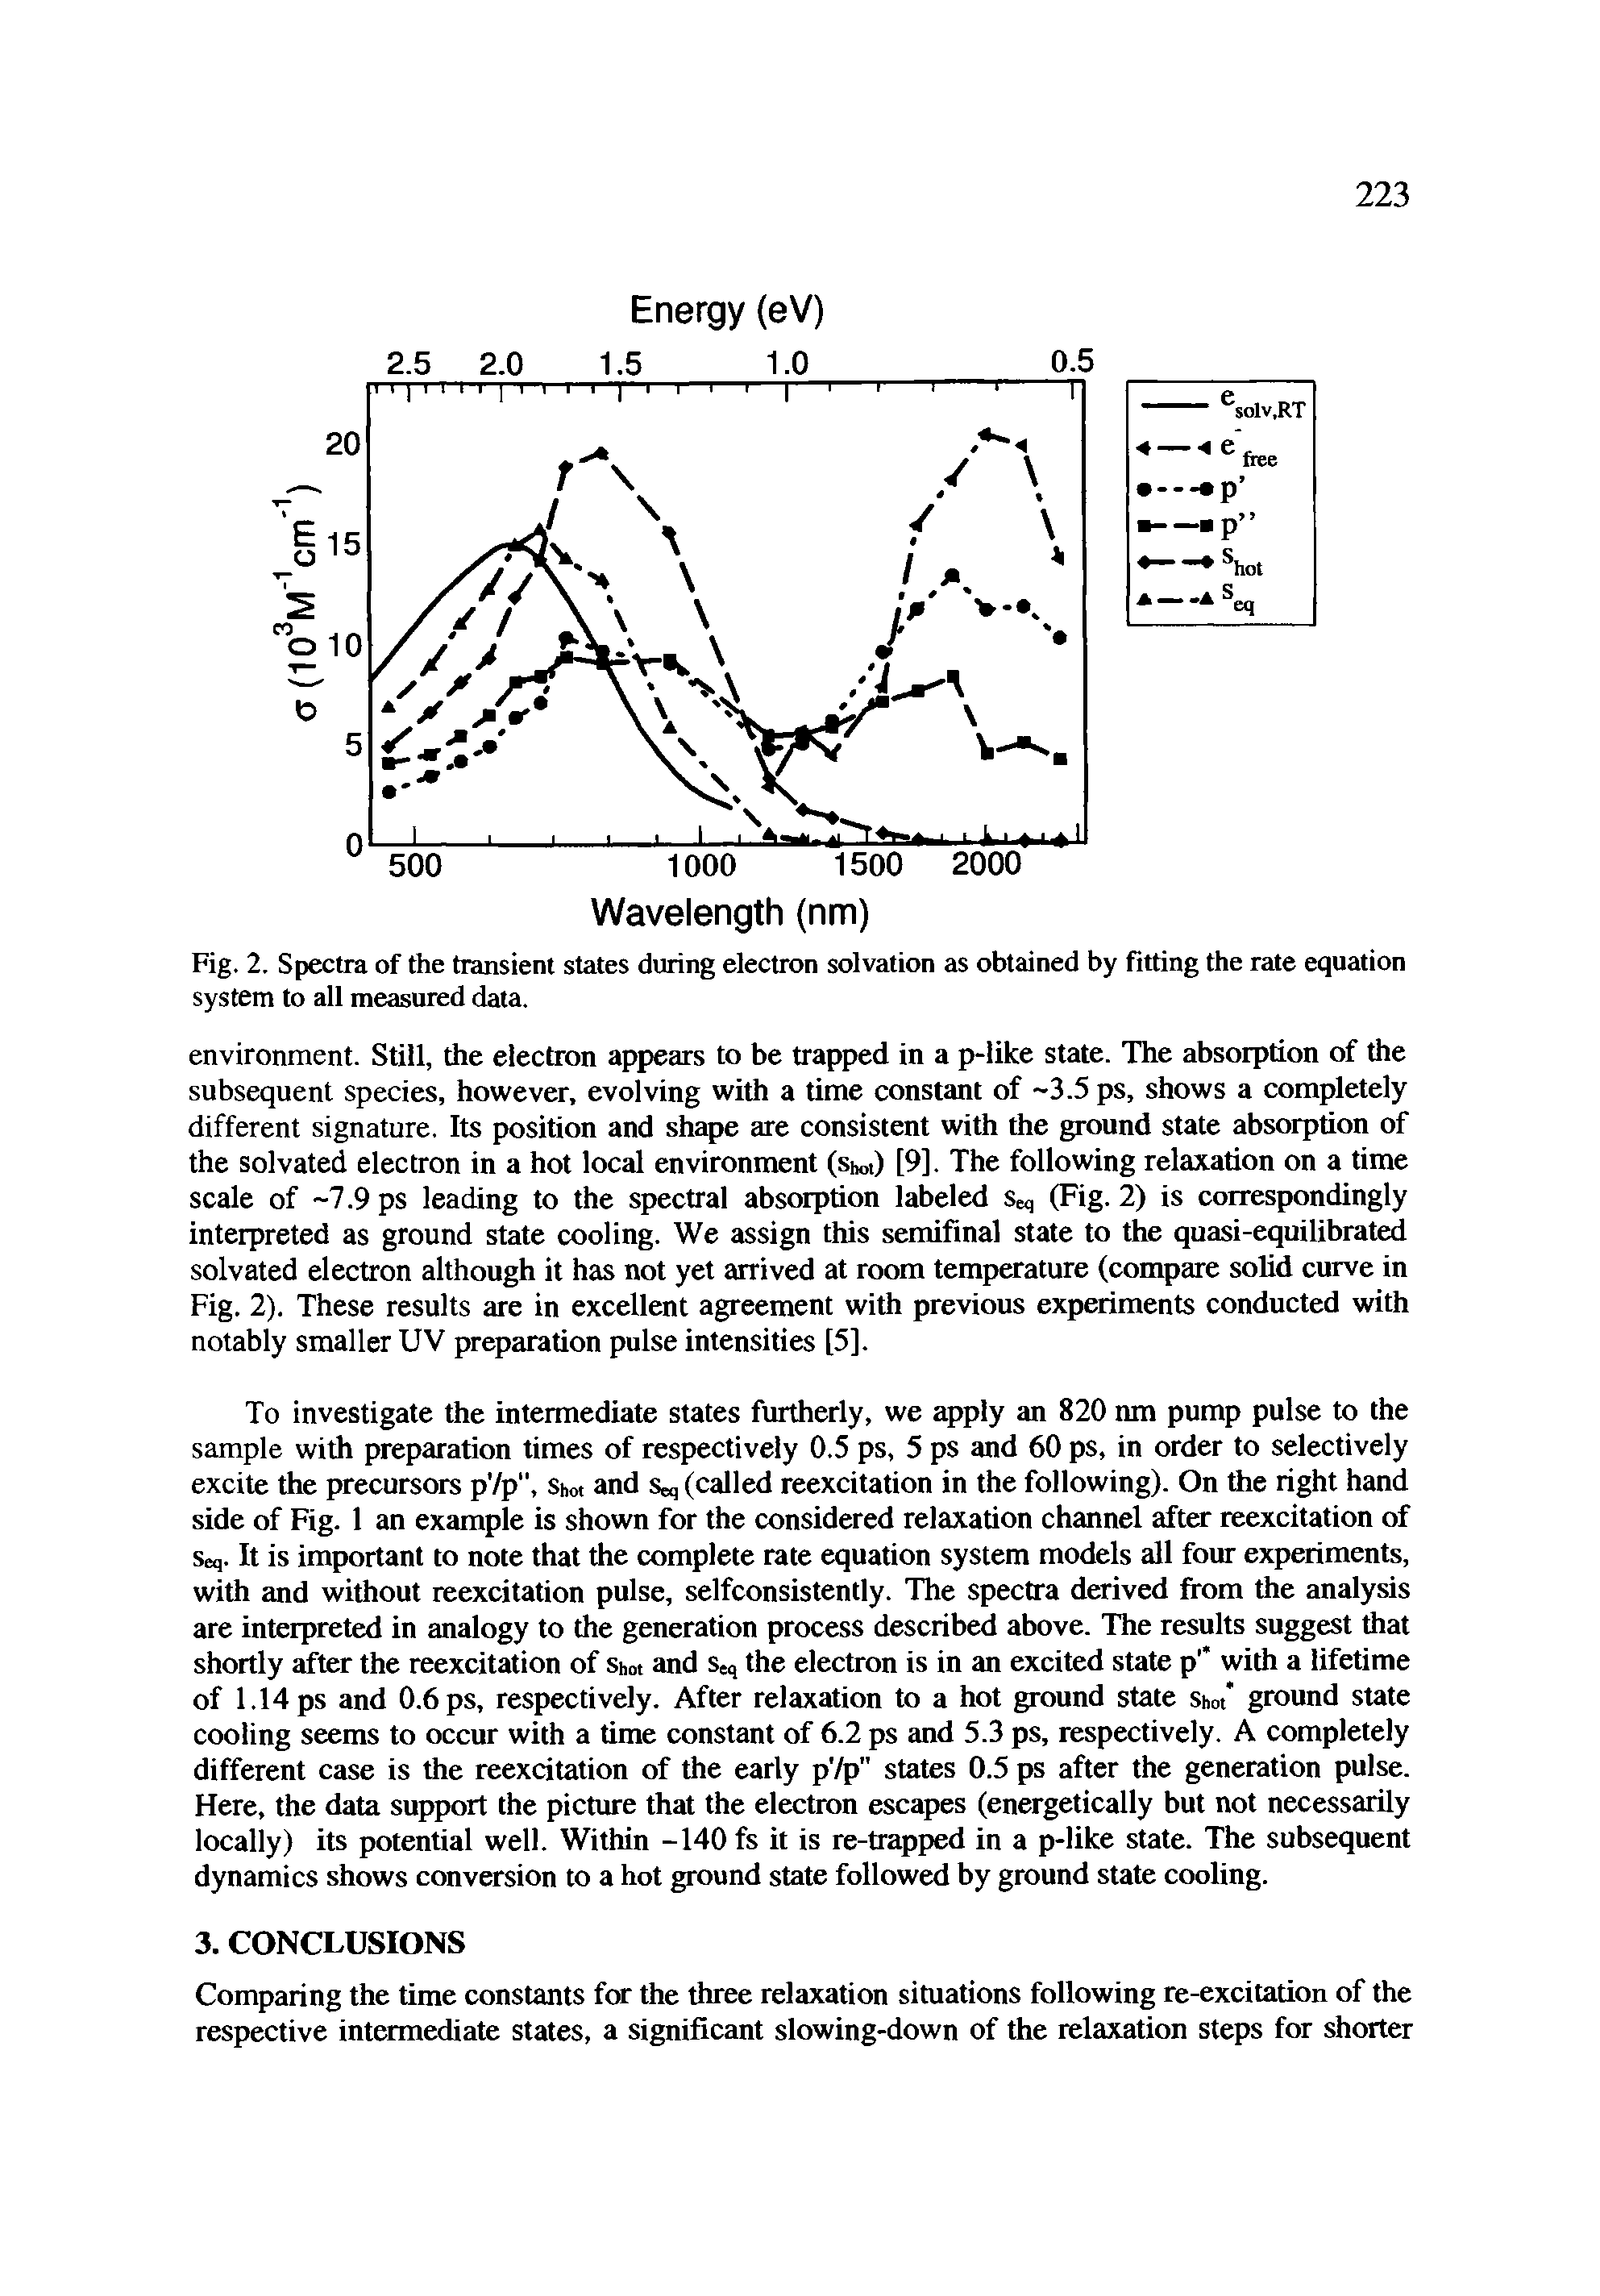 Fig. 2. Spectra of the transient states during electron solvation as obtained by fitting the rate equation system to all measured data.